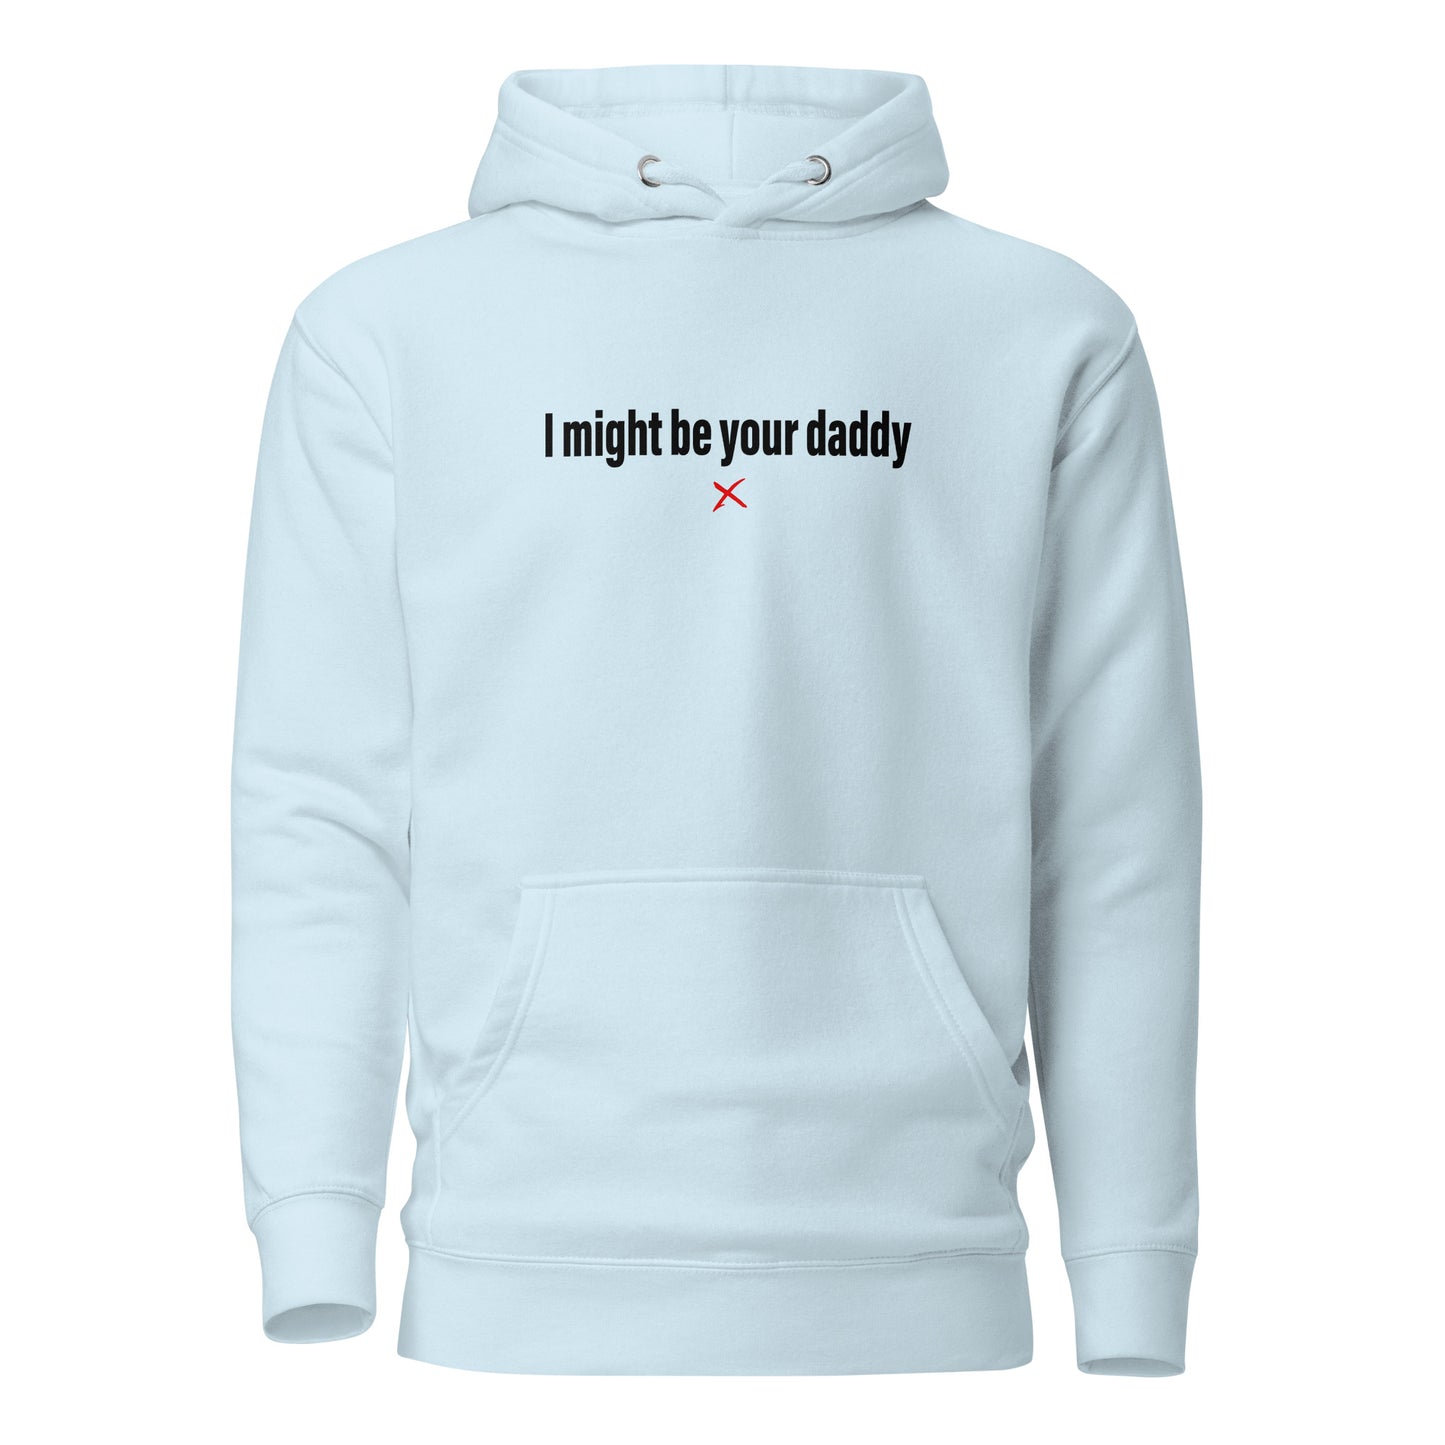 I might be your daddy - Hoodie